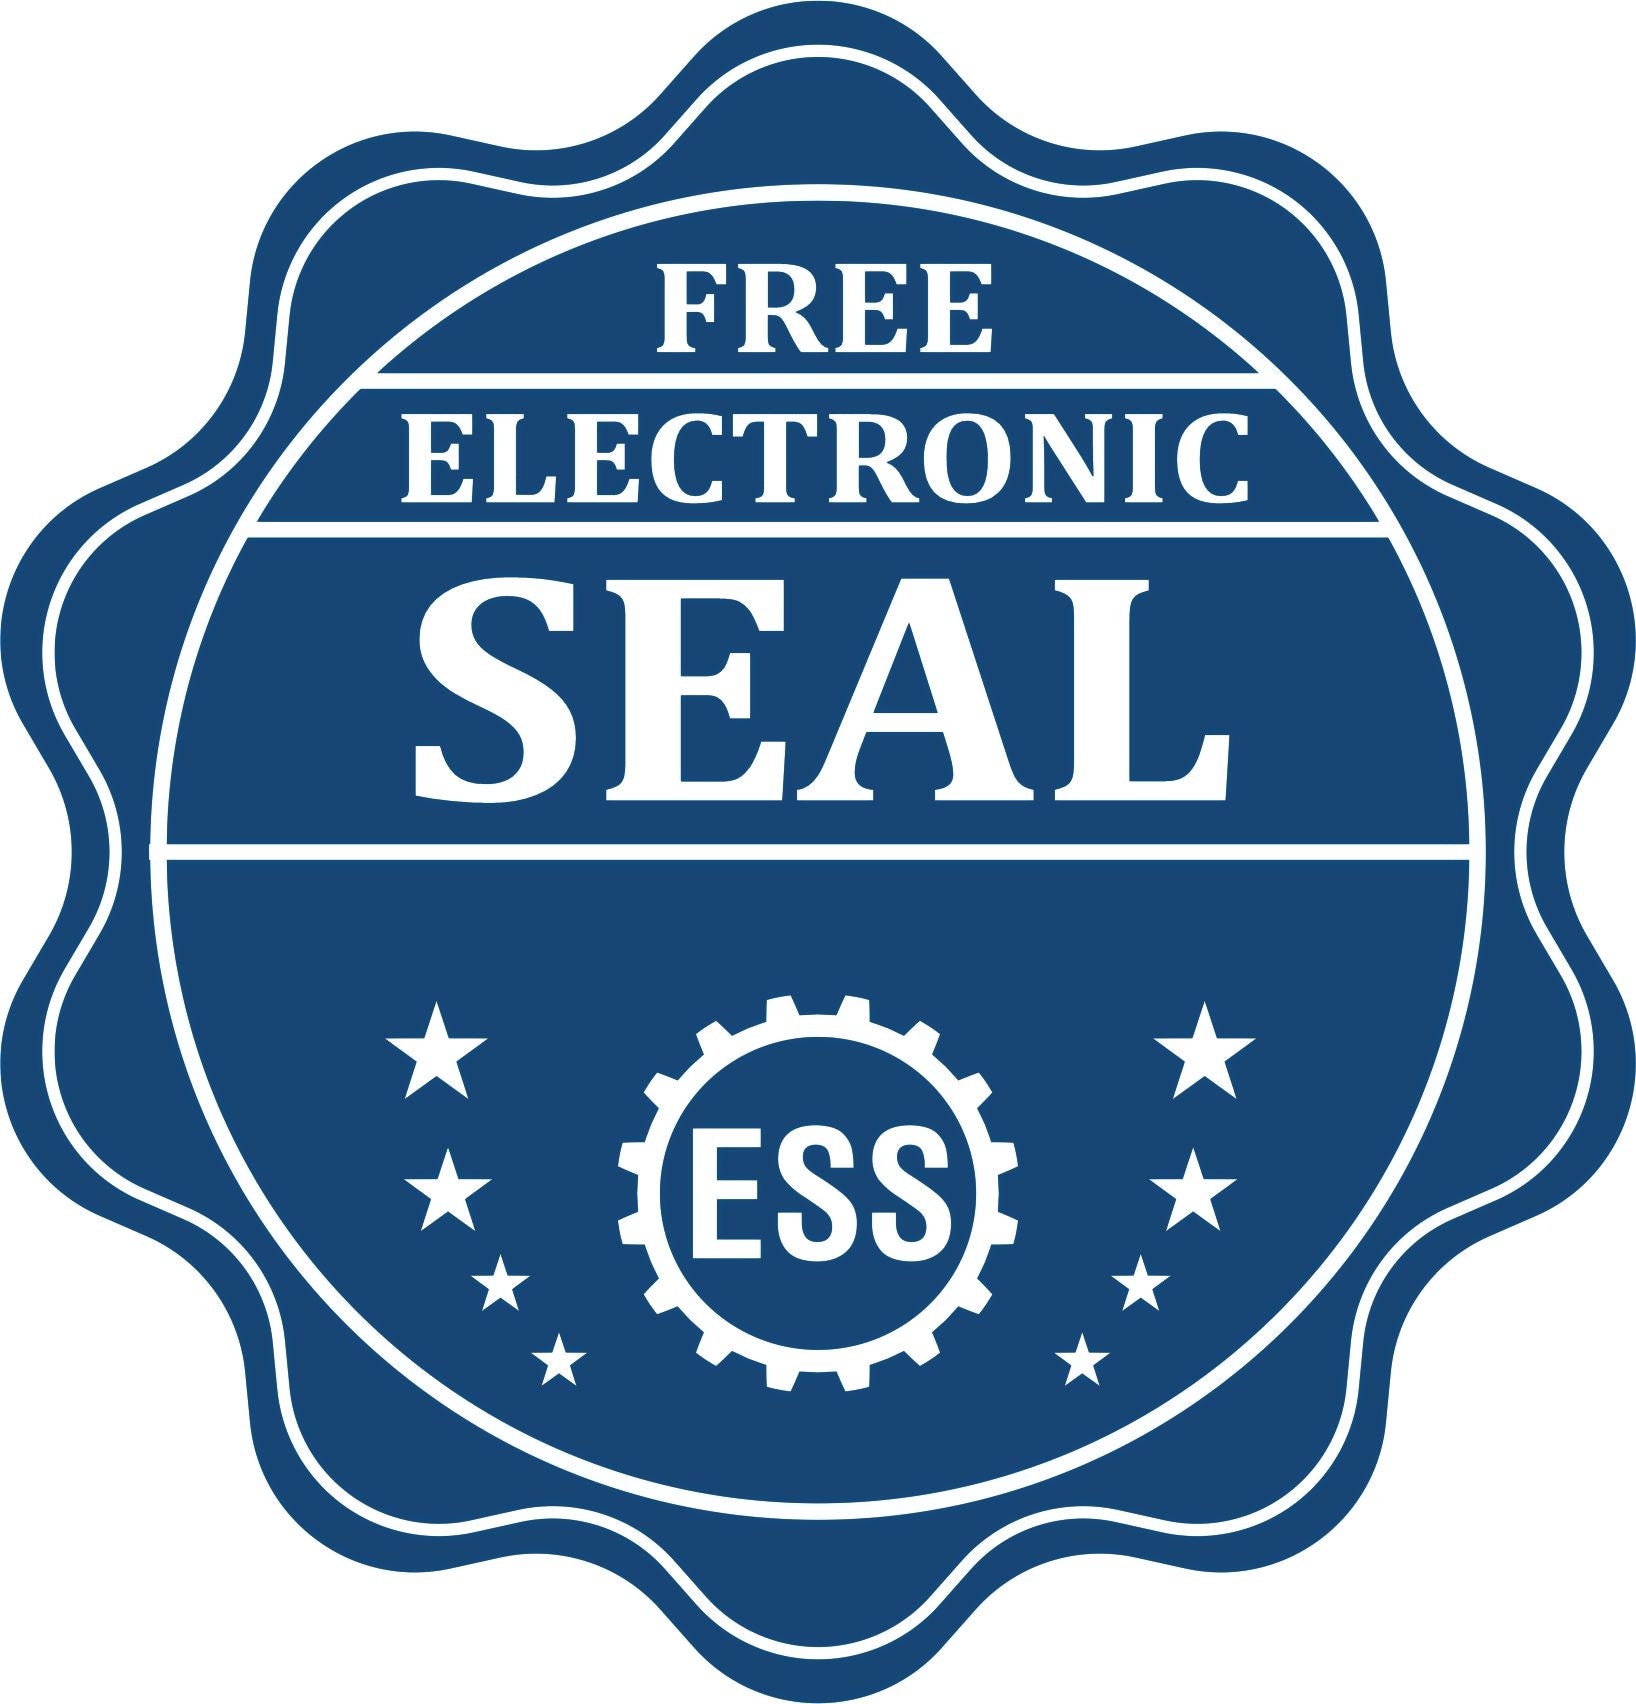 A badge showing a free electronic seal for the Hybrid Delaware Geologist Seal with stars and the ESS gear on the emblem.